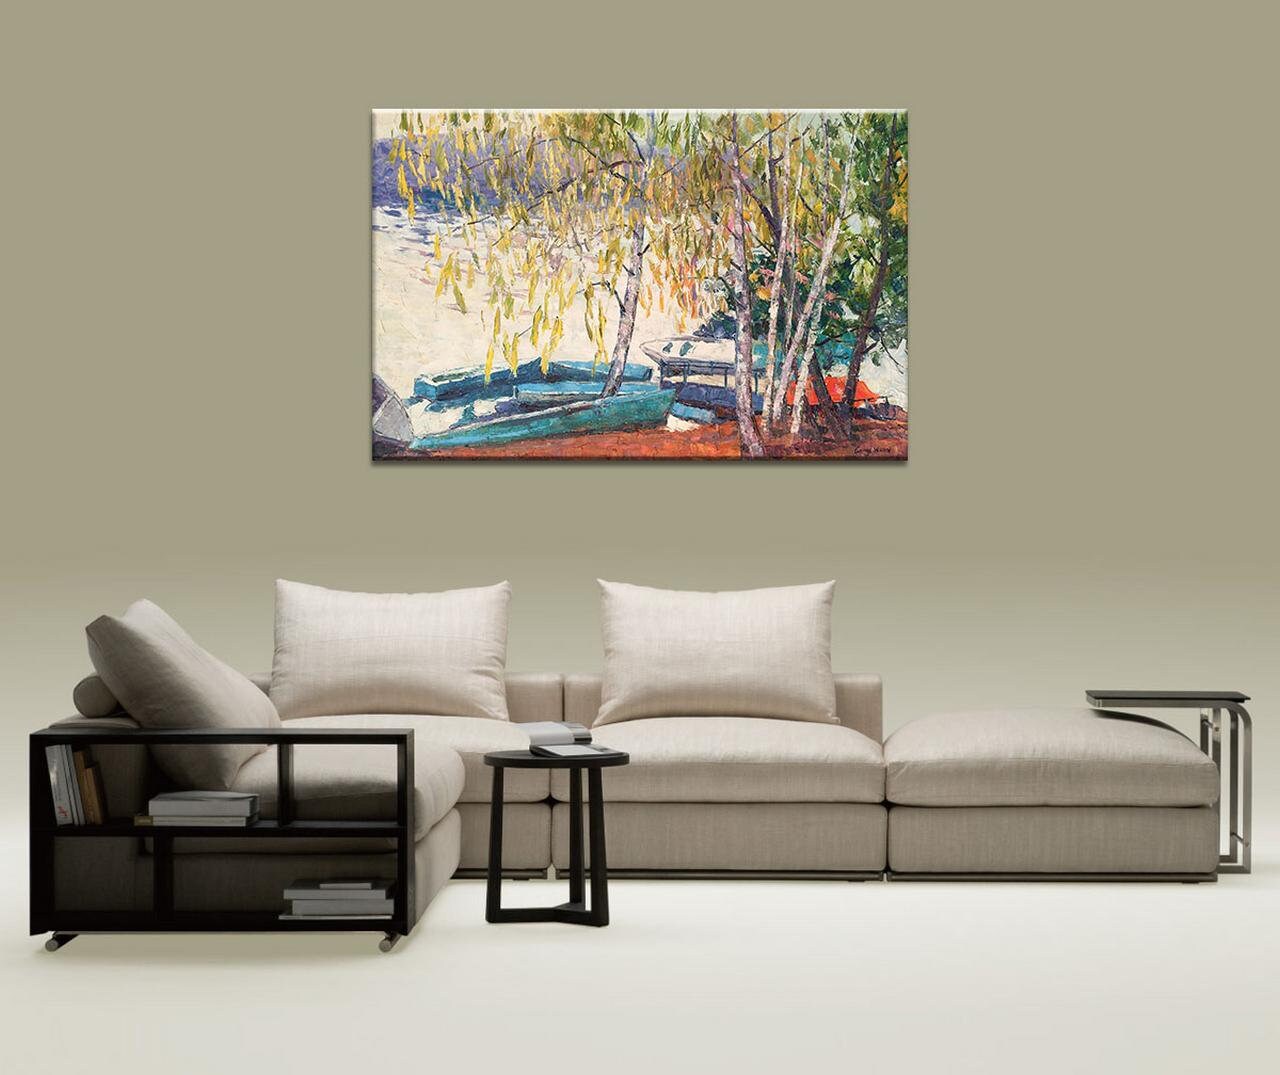 Landscape Painting Boats by the Lake - Upgrade your office decor with this contemporary oil painting on canvas